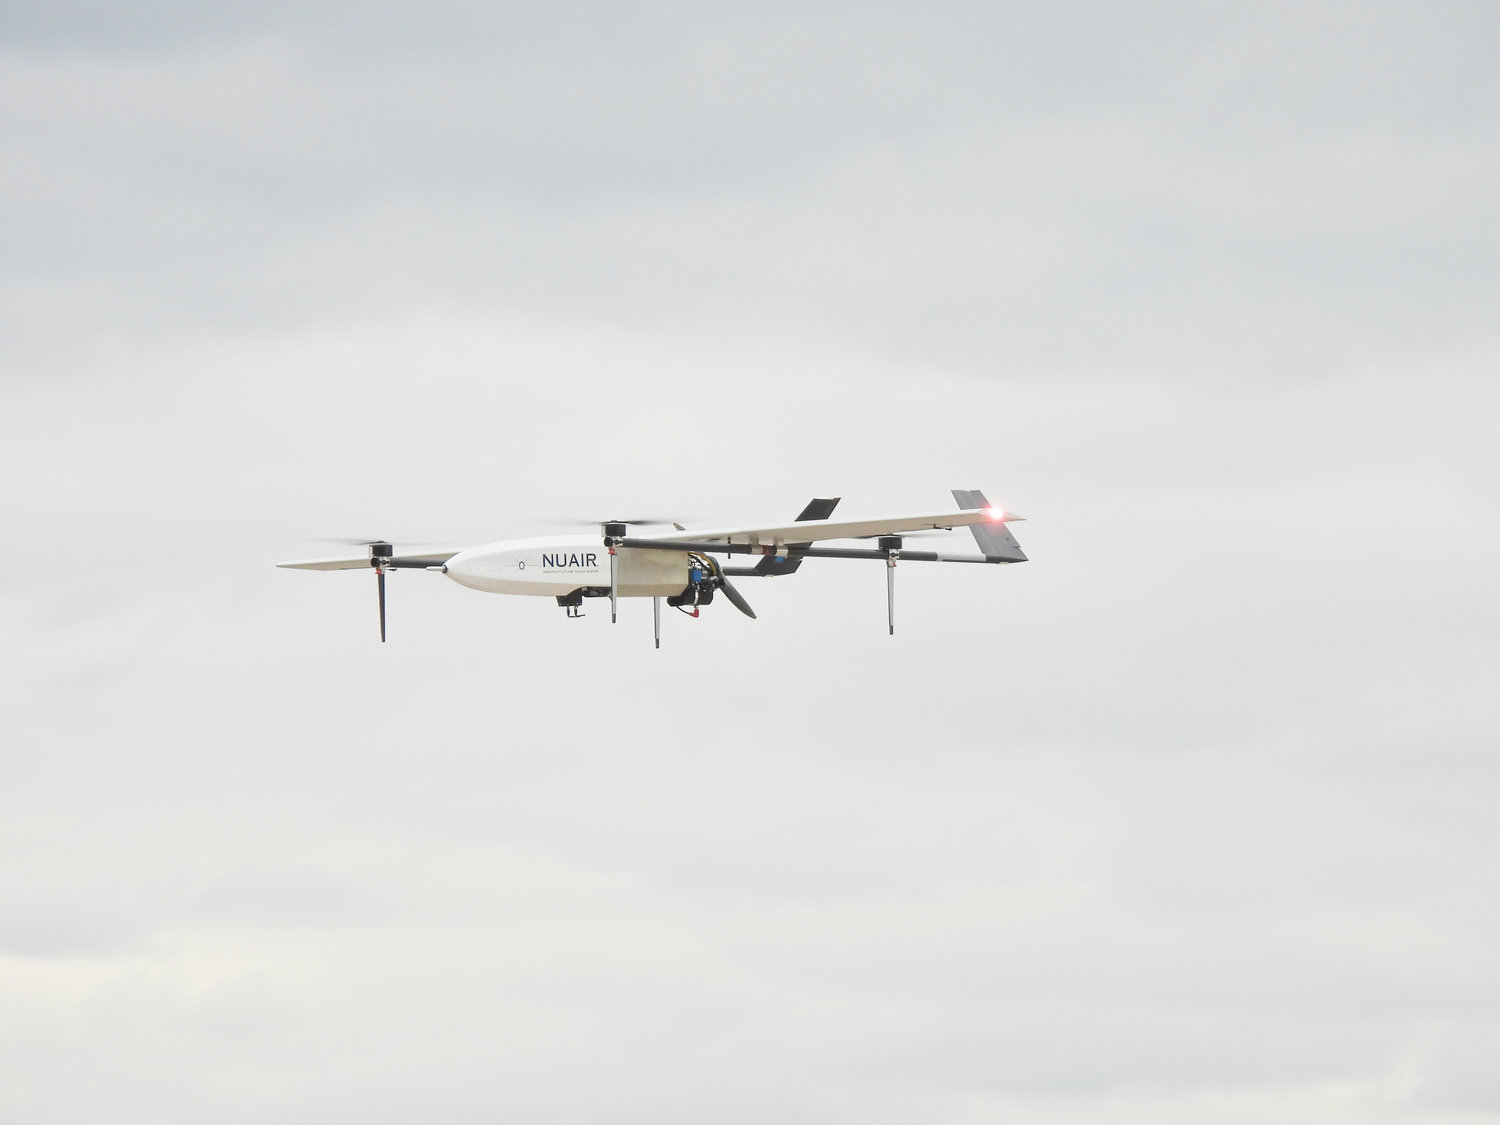 NUAIR's Supervolo drone flies more than 100 feet above Griffiss International Airport, getting ready to touch down for a landing